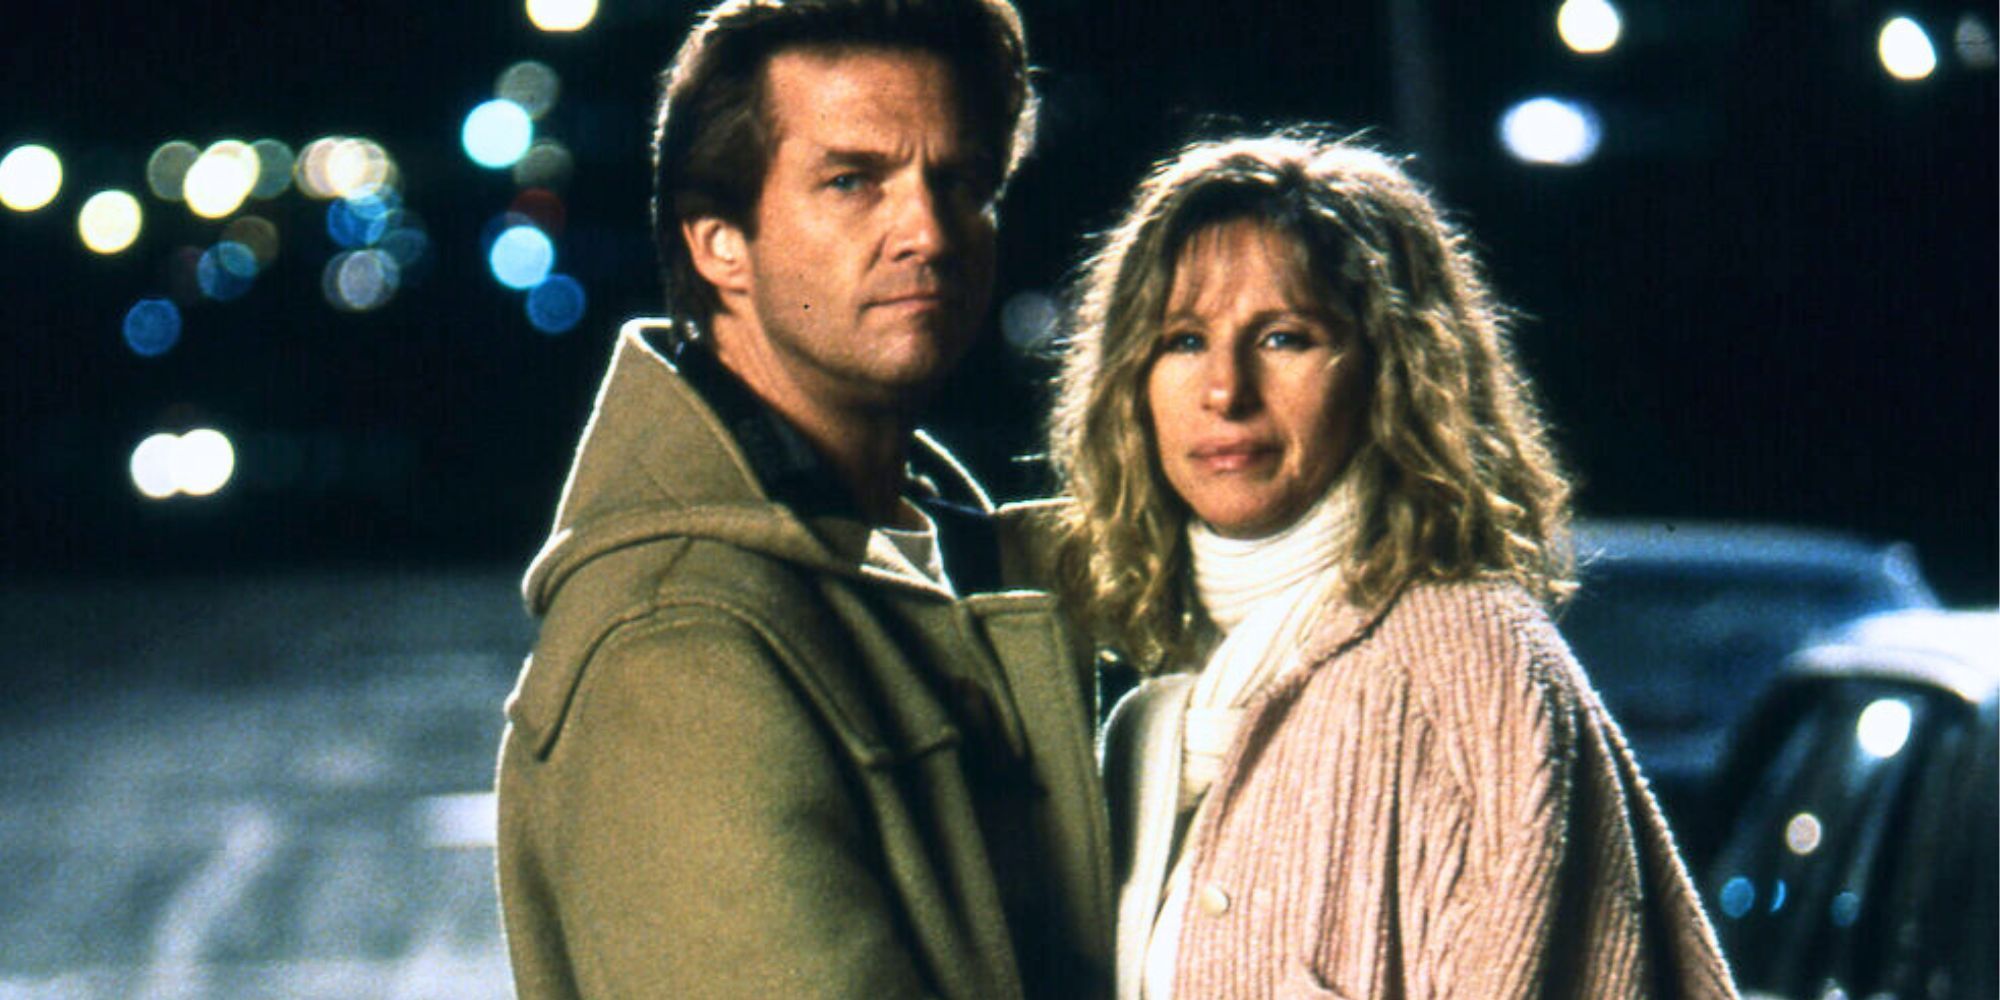 Jeff Bridges and Barbra Streisand standing in the street together in The Mirror Has Two Faces (1996)